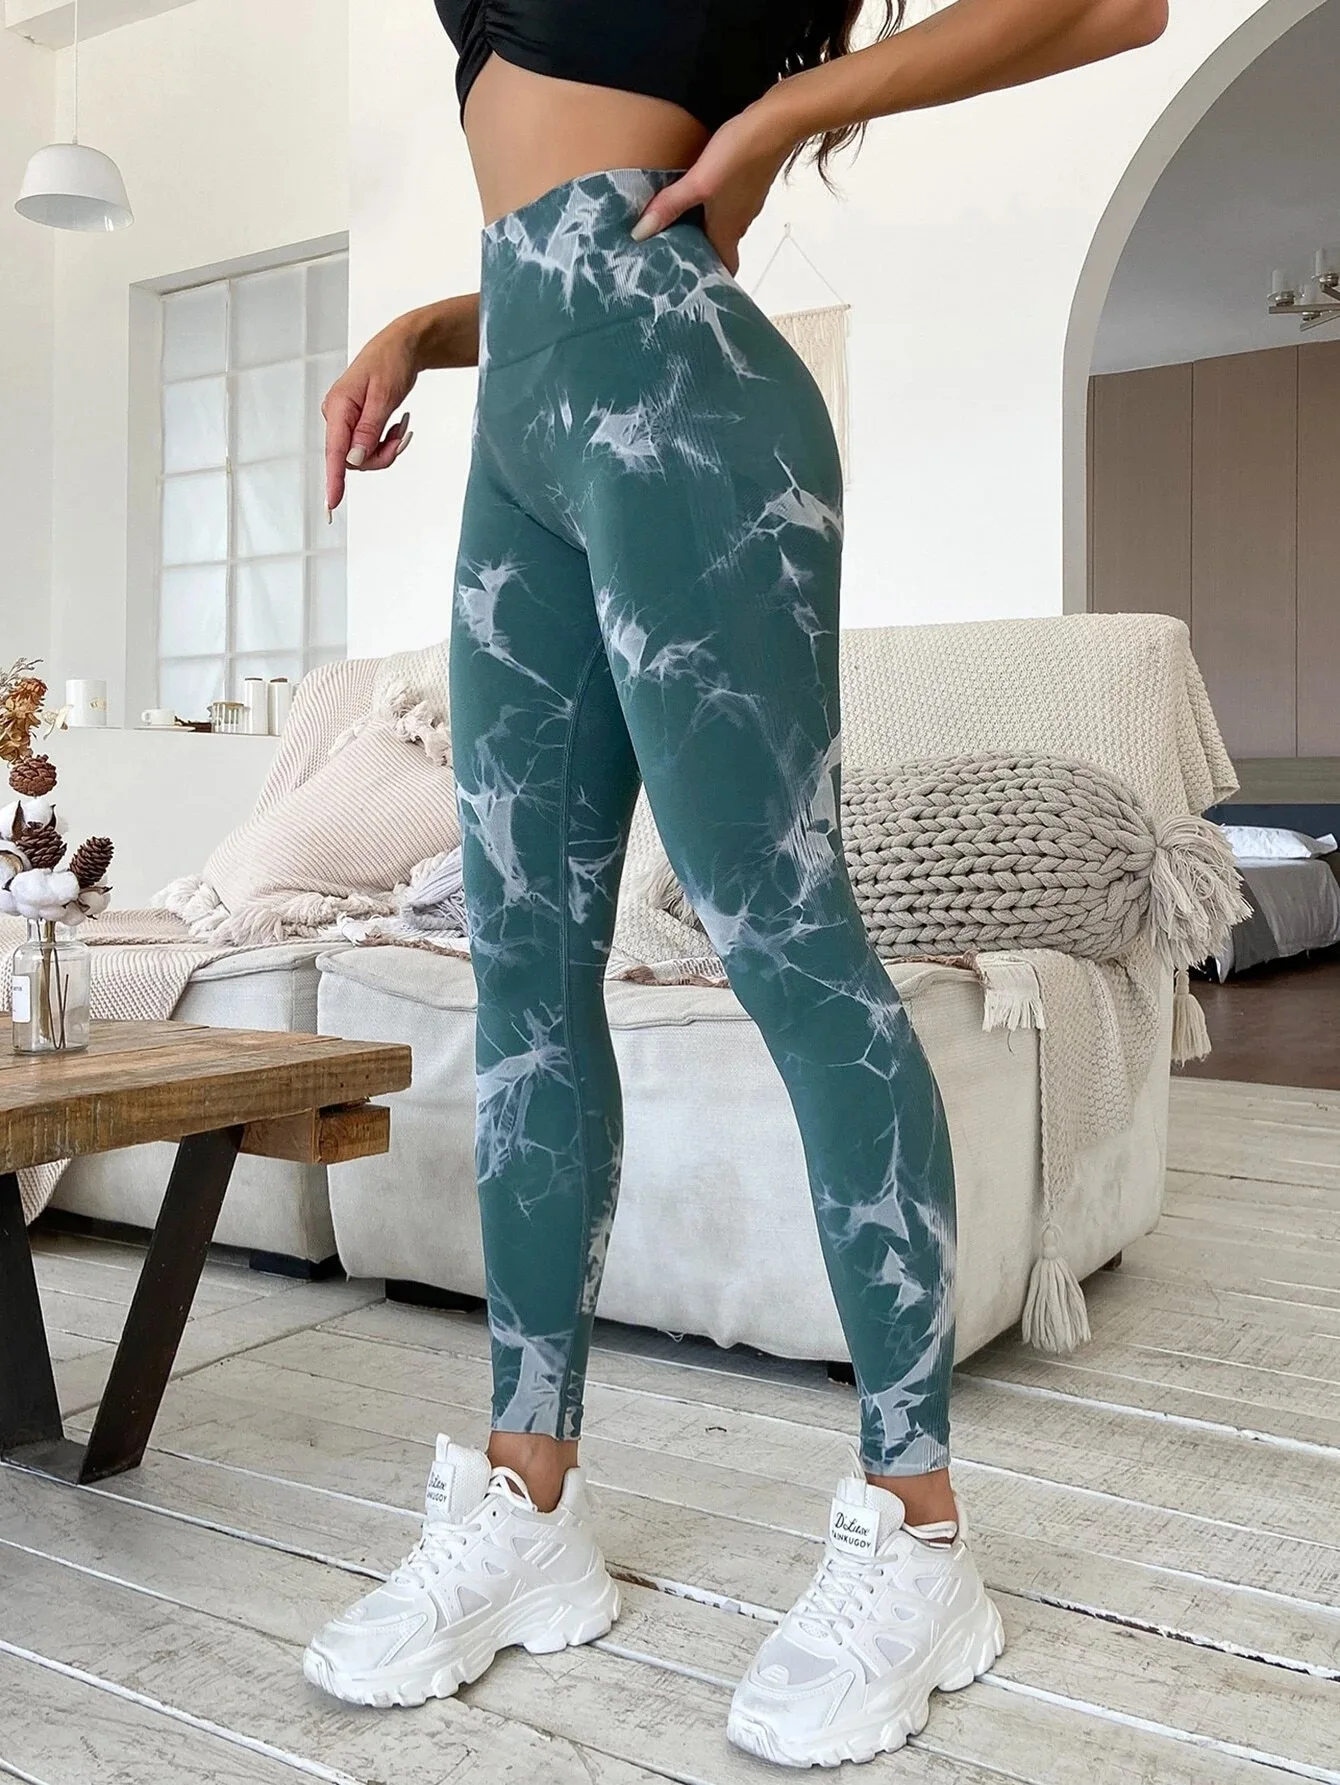 CHRLEISURE Seamless  Leggings Women  Tight Tie Dye Sports Pants High Waisted  Stomach Breathable  Leggings  Joggers Women aybl leggings